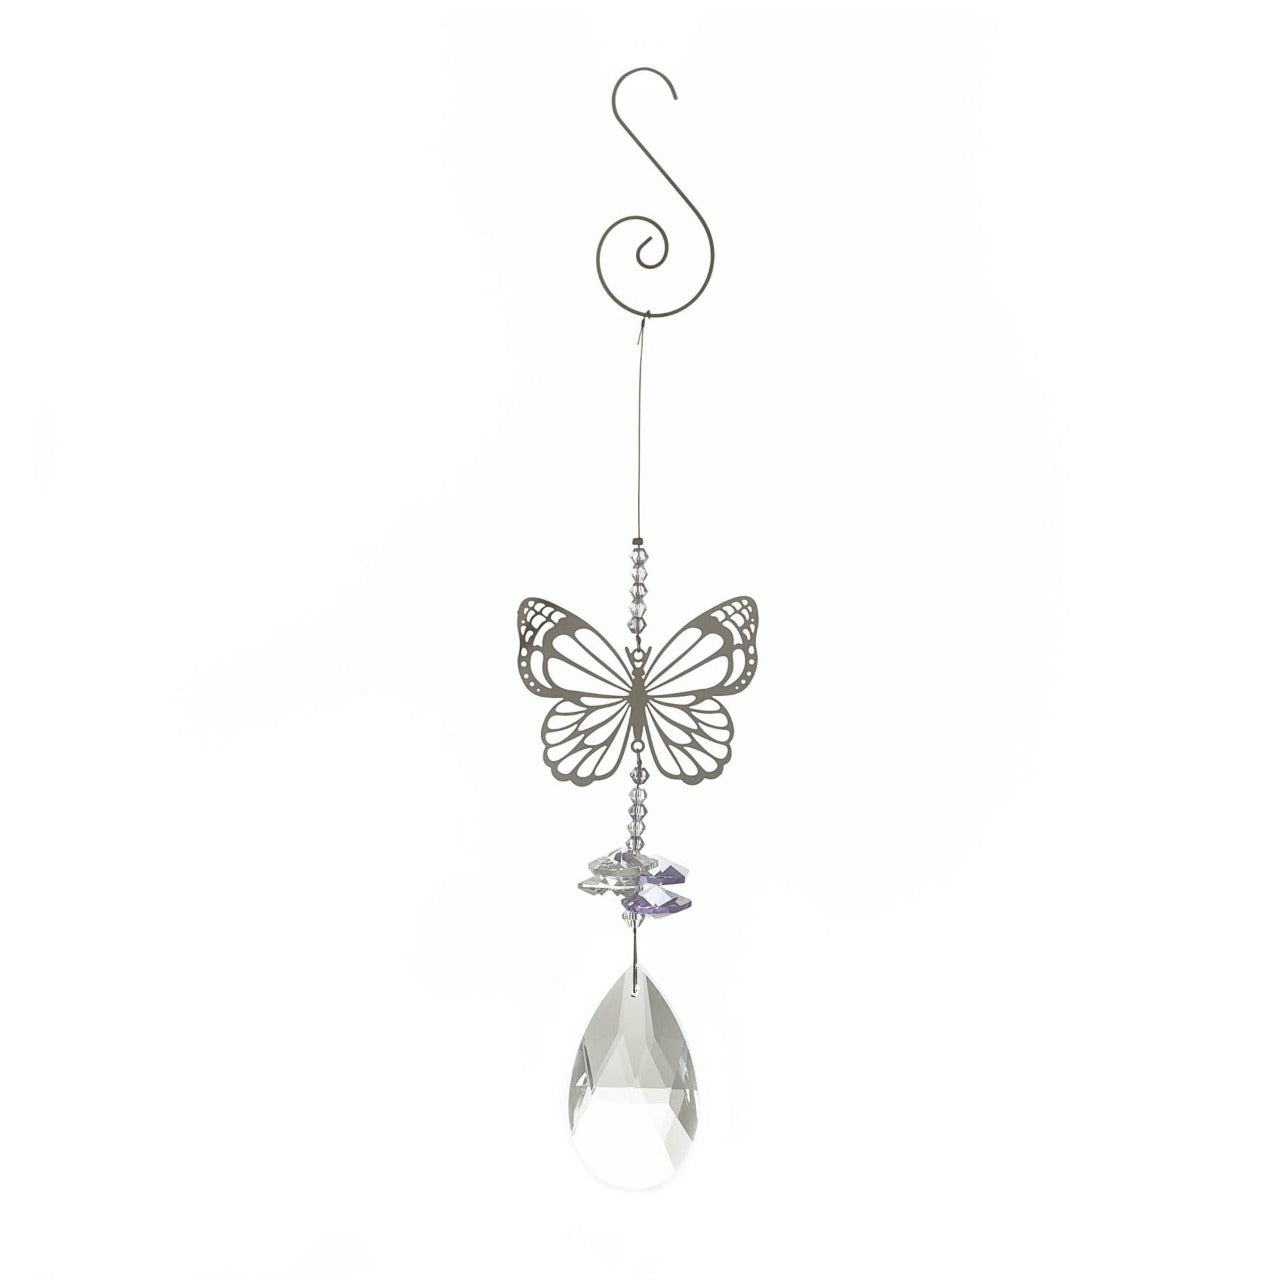 Thoughts of You Crystal Metal Hanger - Butterfly  A crystal metal hanger from Thoughts of You by CELEBRATIONS®.  This sparkling decoration is a thoughtful memorial gift which glistens in the sun to commemorate loved ones who have passed.